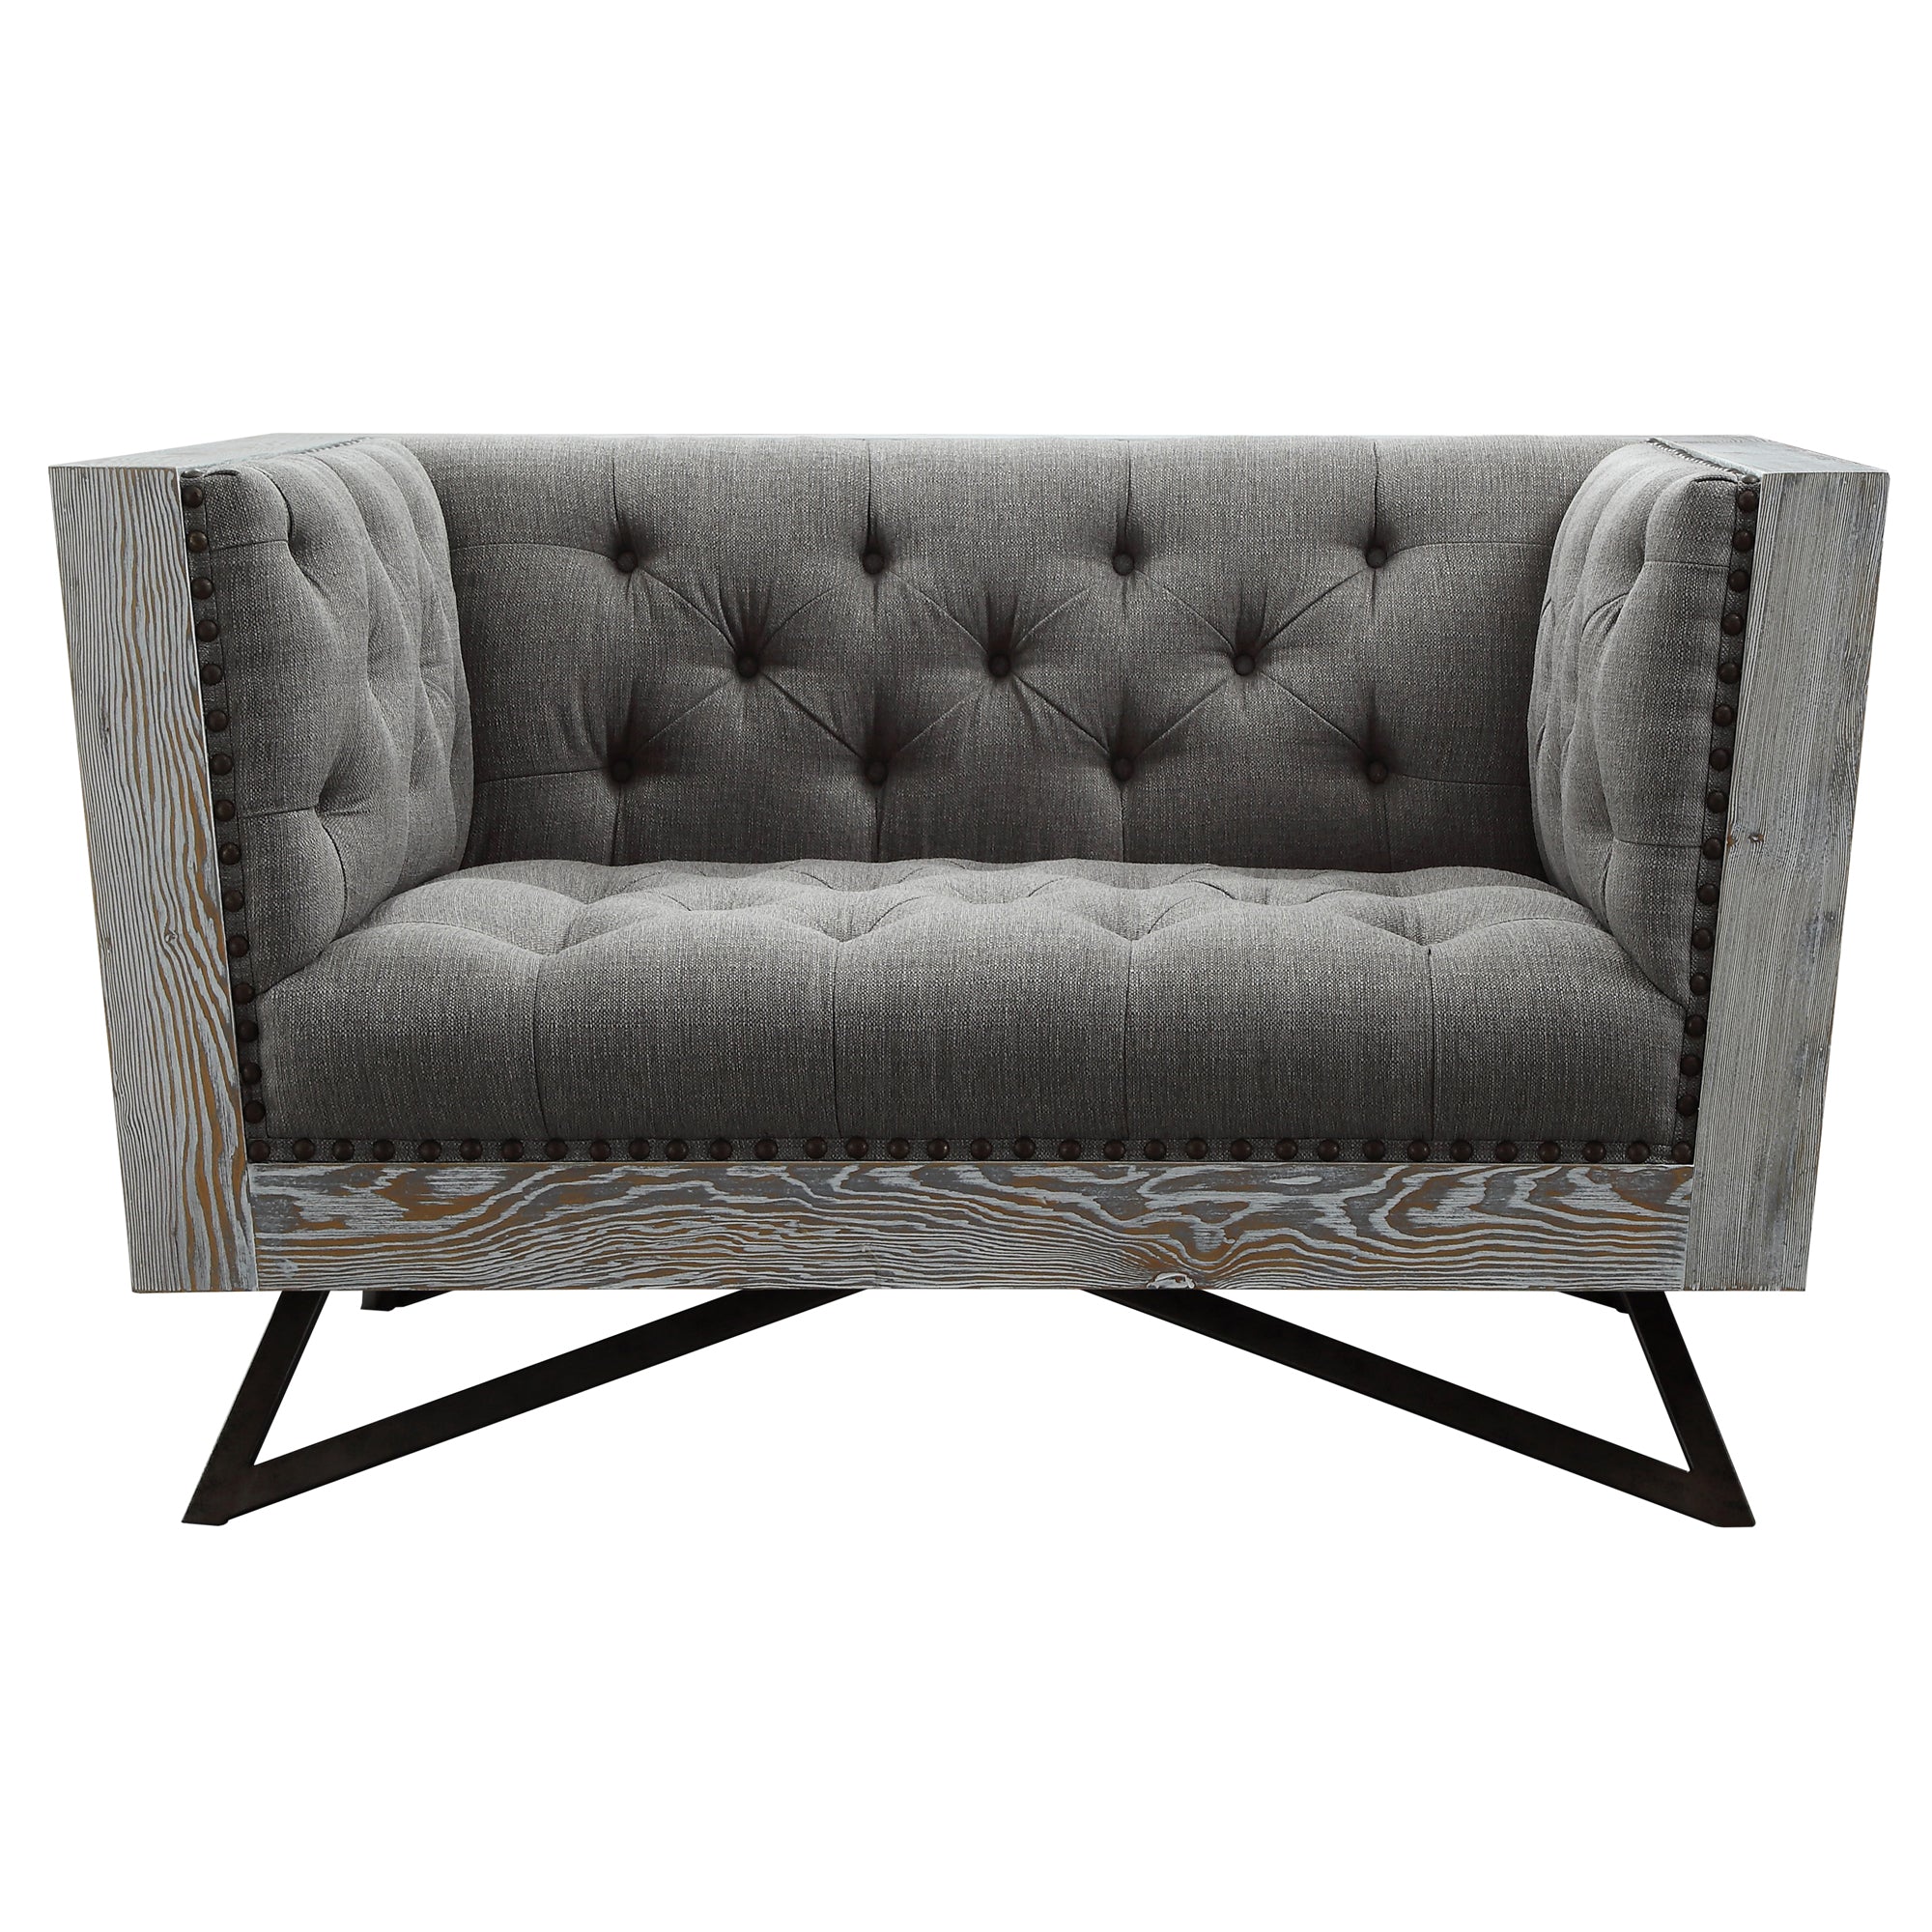 Armen Living Lcre1gr Regis Contemporary Chair In Grey Fabric With Black Metal Finish Legs And Antique Brown Nailhead Accents